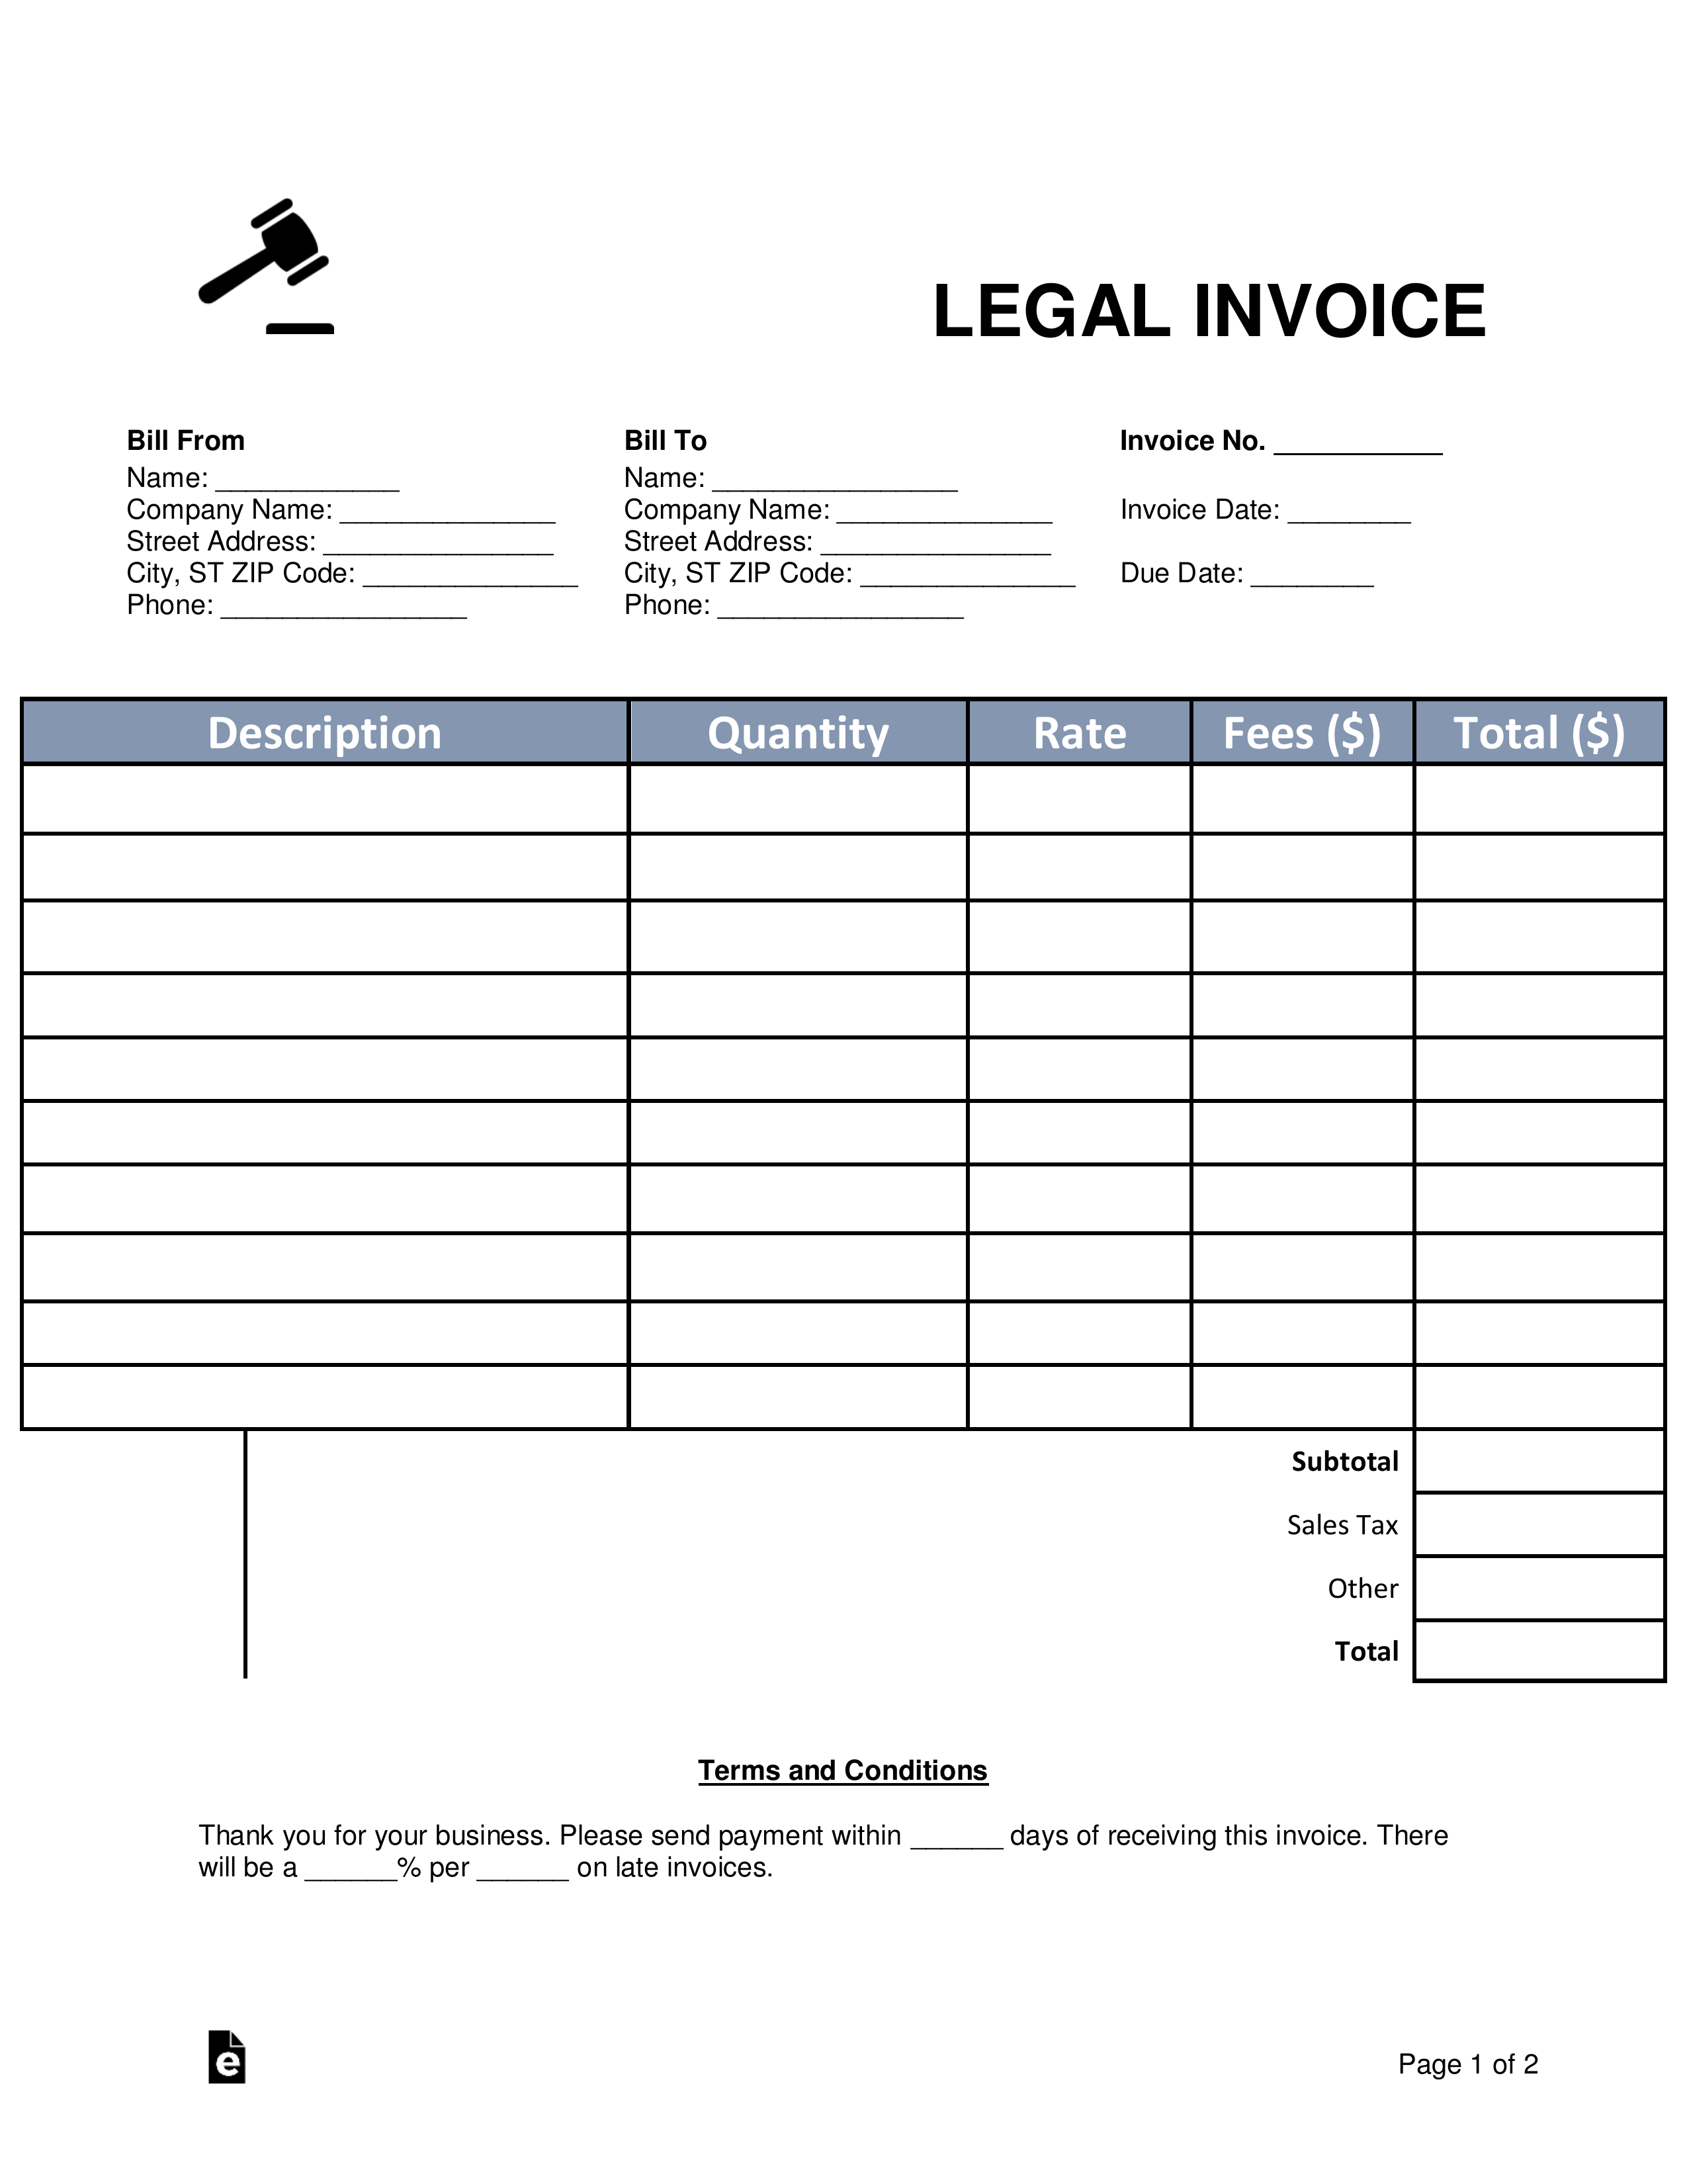 Law Firm Billable Hours Template from eforms.com